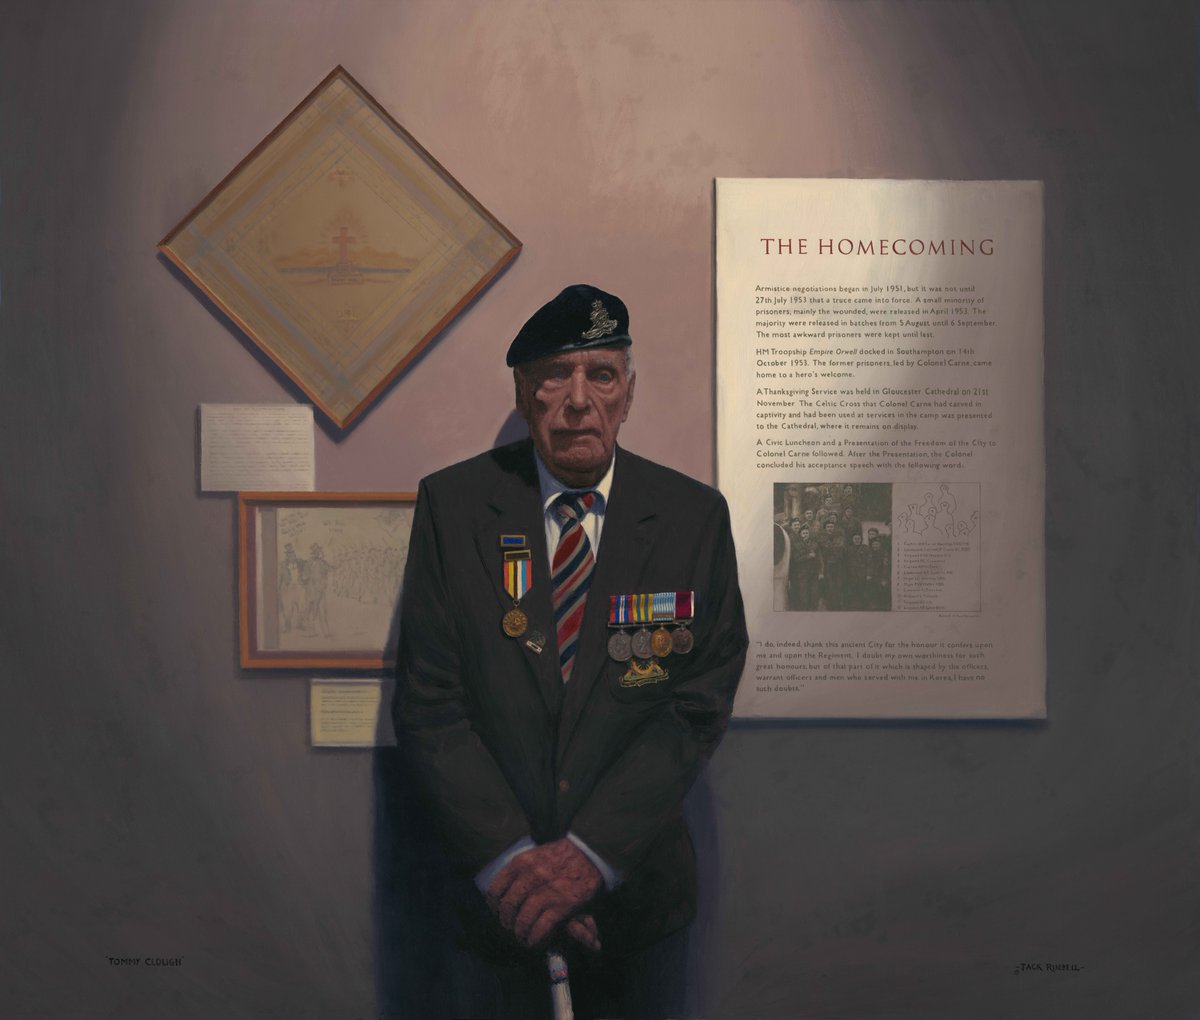 Honoured to have my portrait 'TOMMY CLOUGH, PRISONER OF WAR' included in this years ROYAL PORTRAIT SOCIETY EXHIBITION The Mall Galleries London mallgalleries.org.uk/exhibitions-ev… along side world class artists @francesbellptg Anthony Connolly, Alastair Adams, June Mendoza and many others